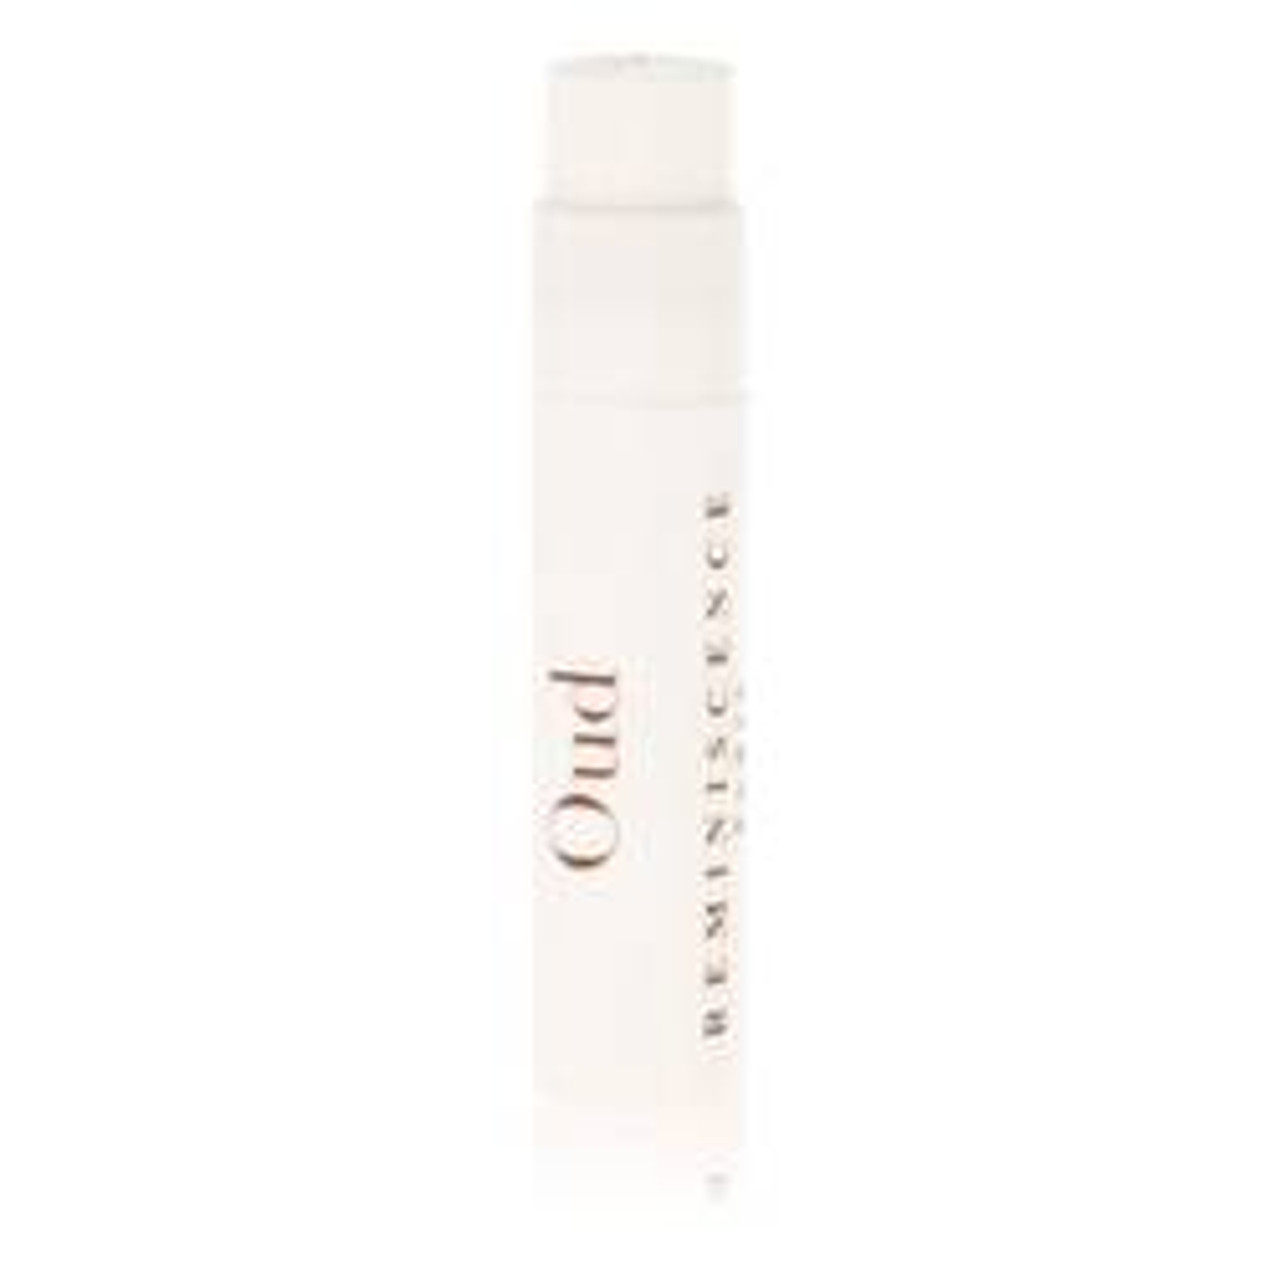 Reminiscence Oud Perfume By Reminiscence Vial (sample) 0.04 oz for Women - *Pre-Order